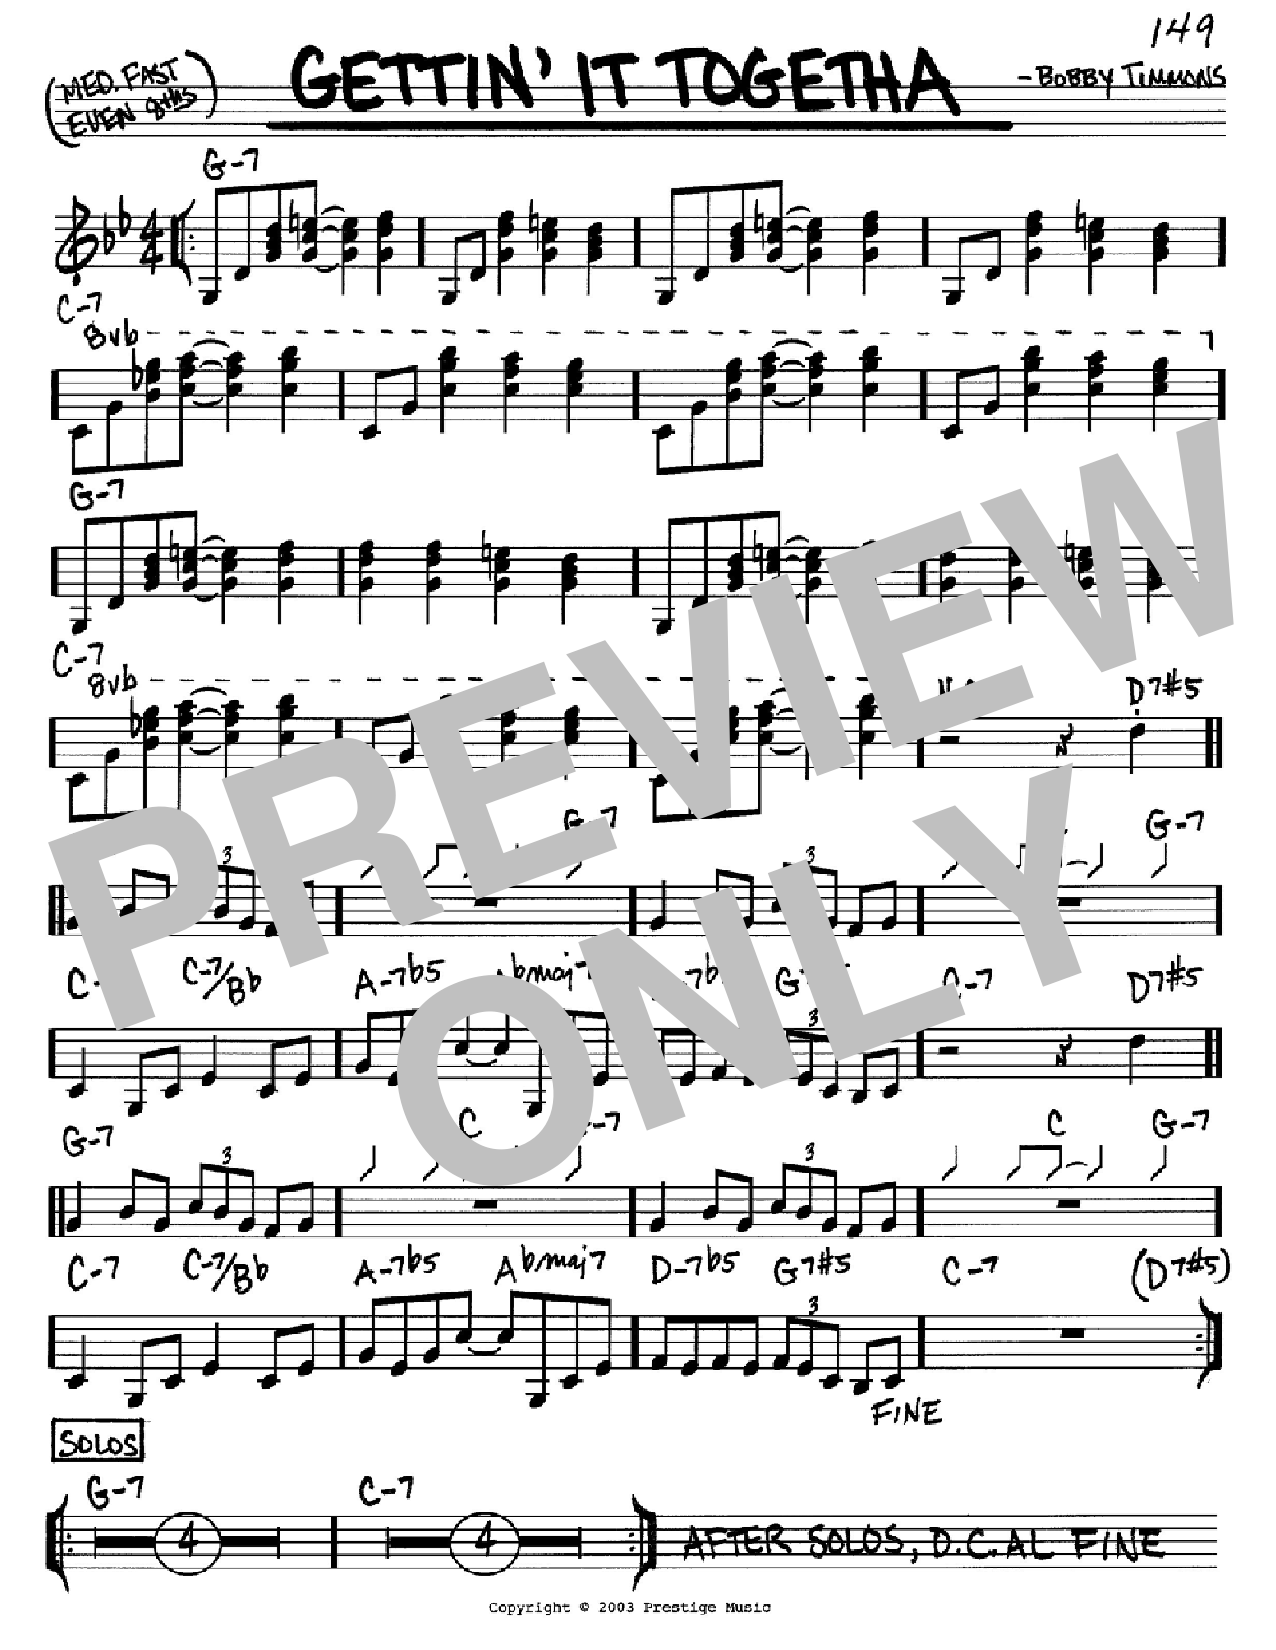 Download Bobby Timmons Gettin' It Togetha Sheet Music